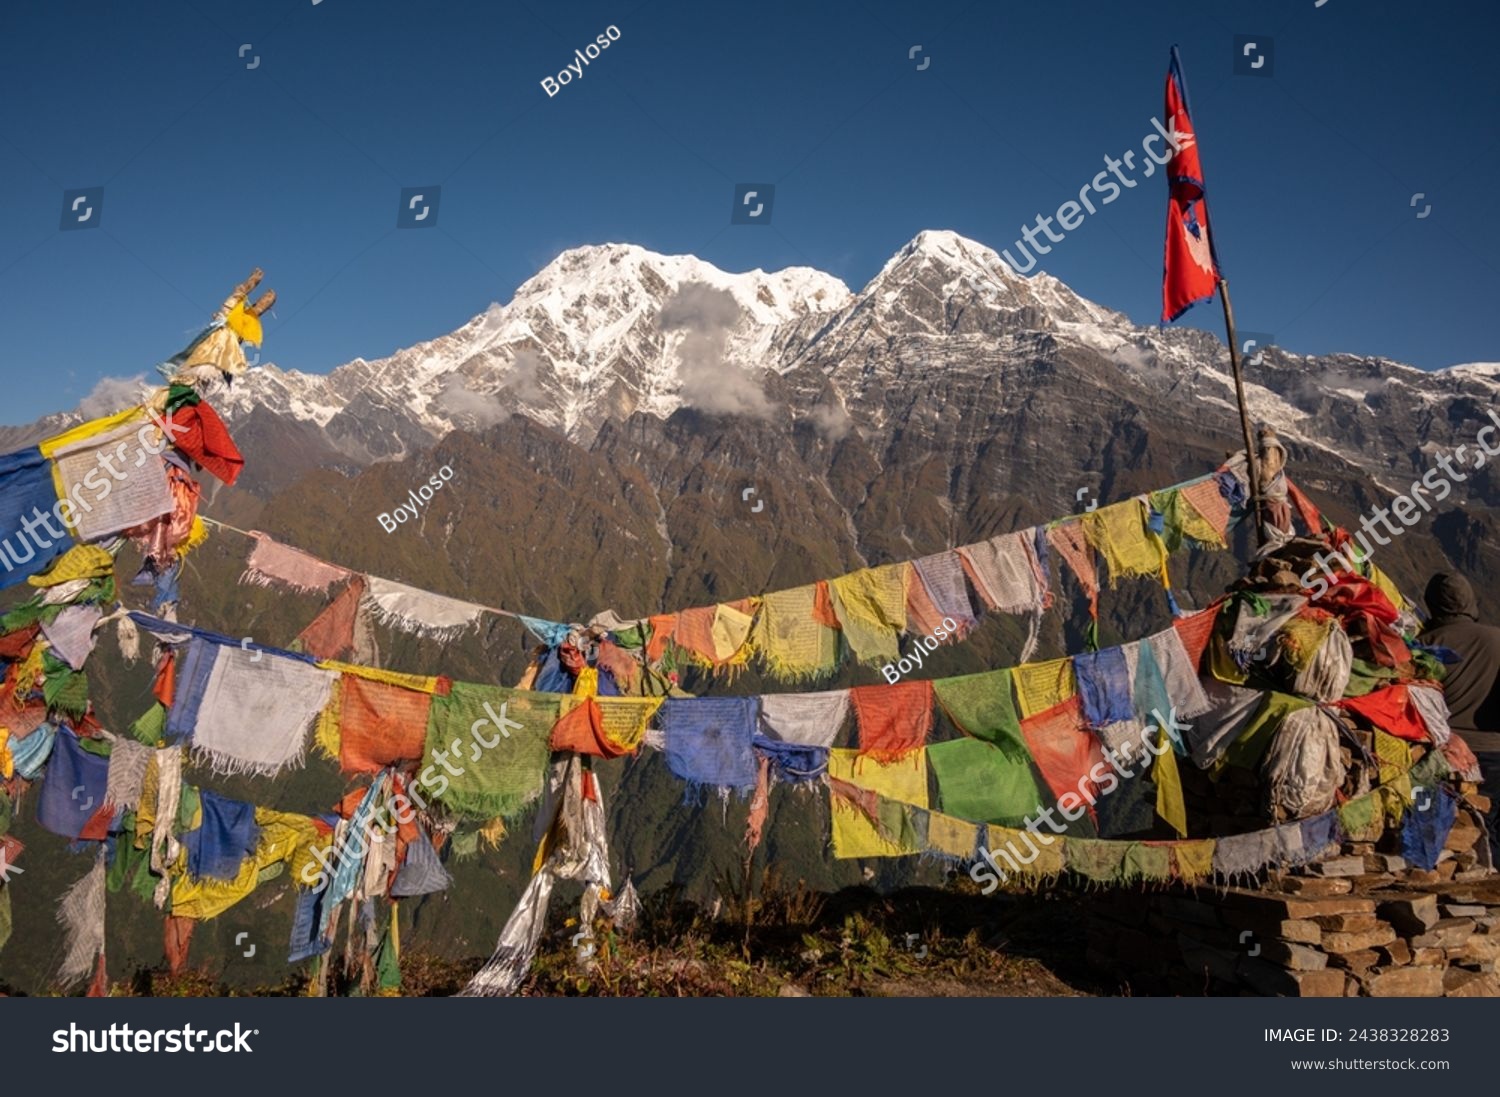 Nepali flag with beautiful view of Mt.Annapurna South (7,219 m) and Mt.Hiunchuli (6,441 m) seen from Mardi Himal view point in the Annapurna region of Nepal. #2438328283